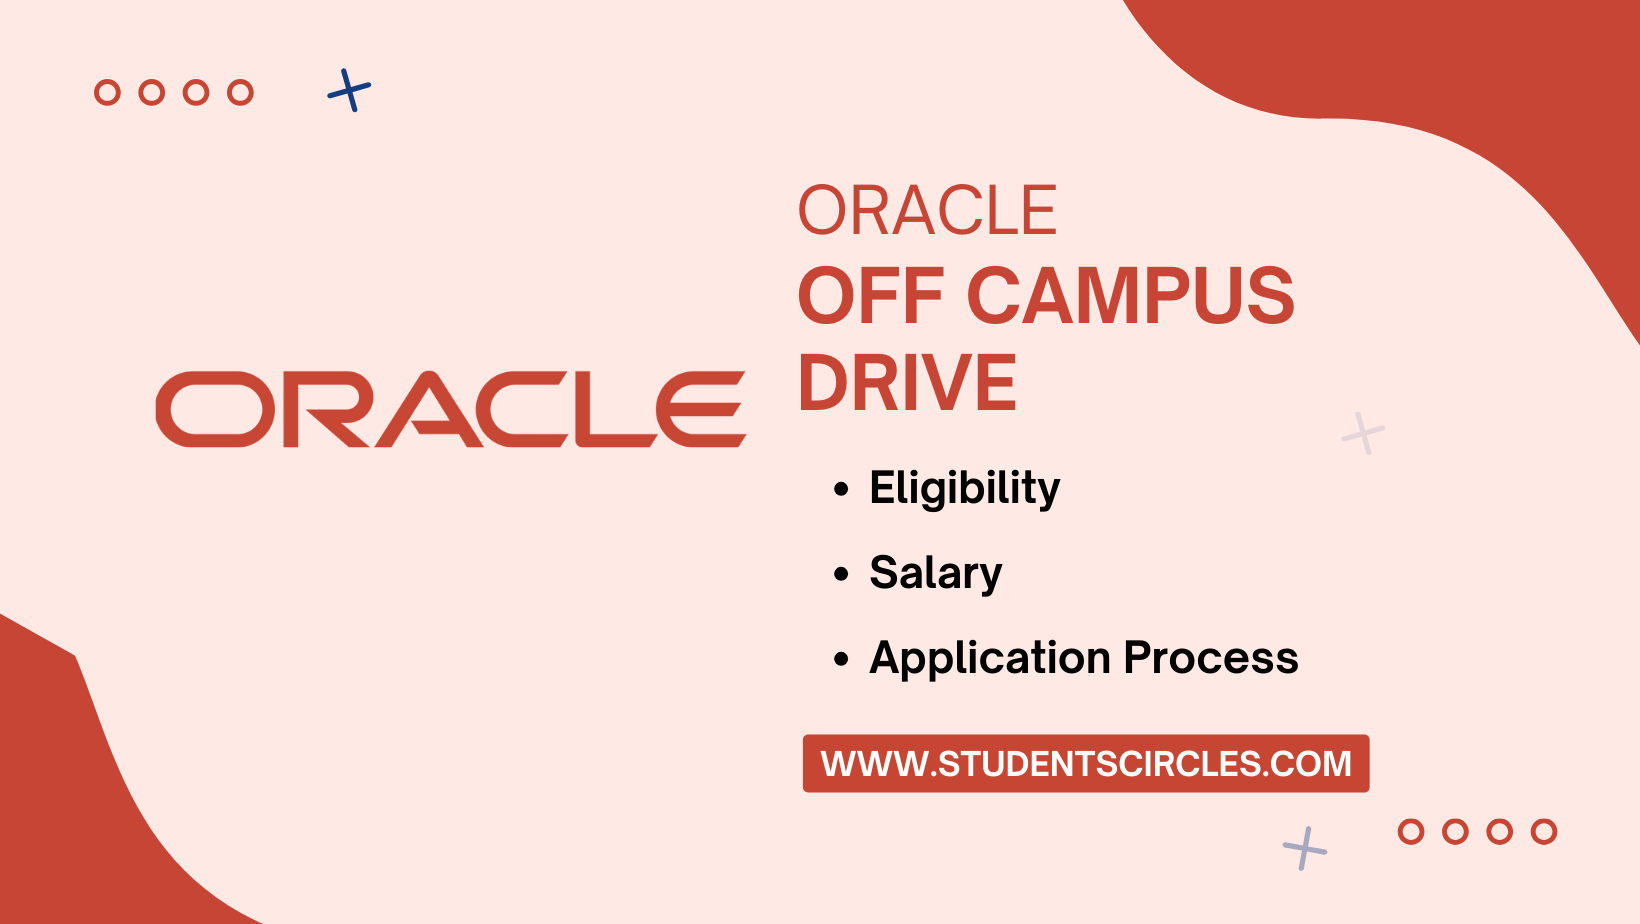 Oracle Off Campus Drive